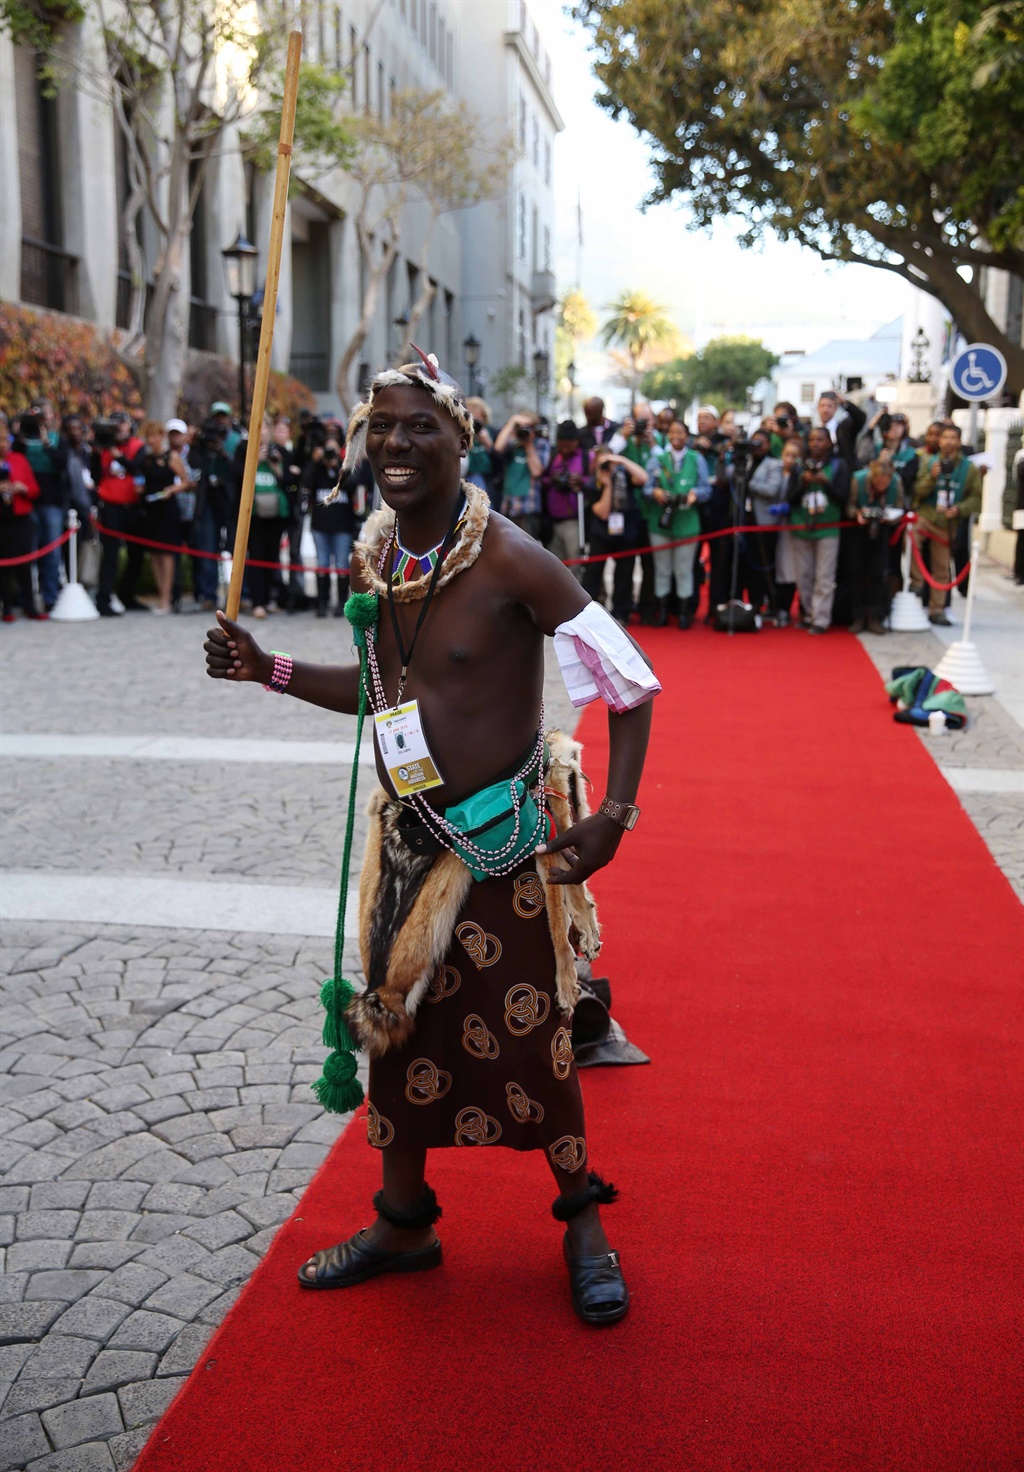 A praise singer at the opening of Parliament and the State of the Nation Address on June 17, 2014 in Cape Town. Picture: Gallo Images / Sunday Times / Esa Alexander